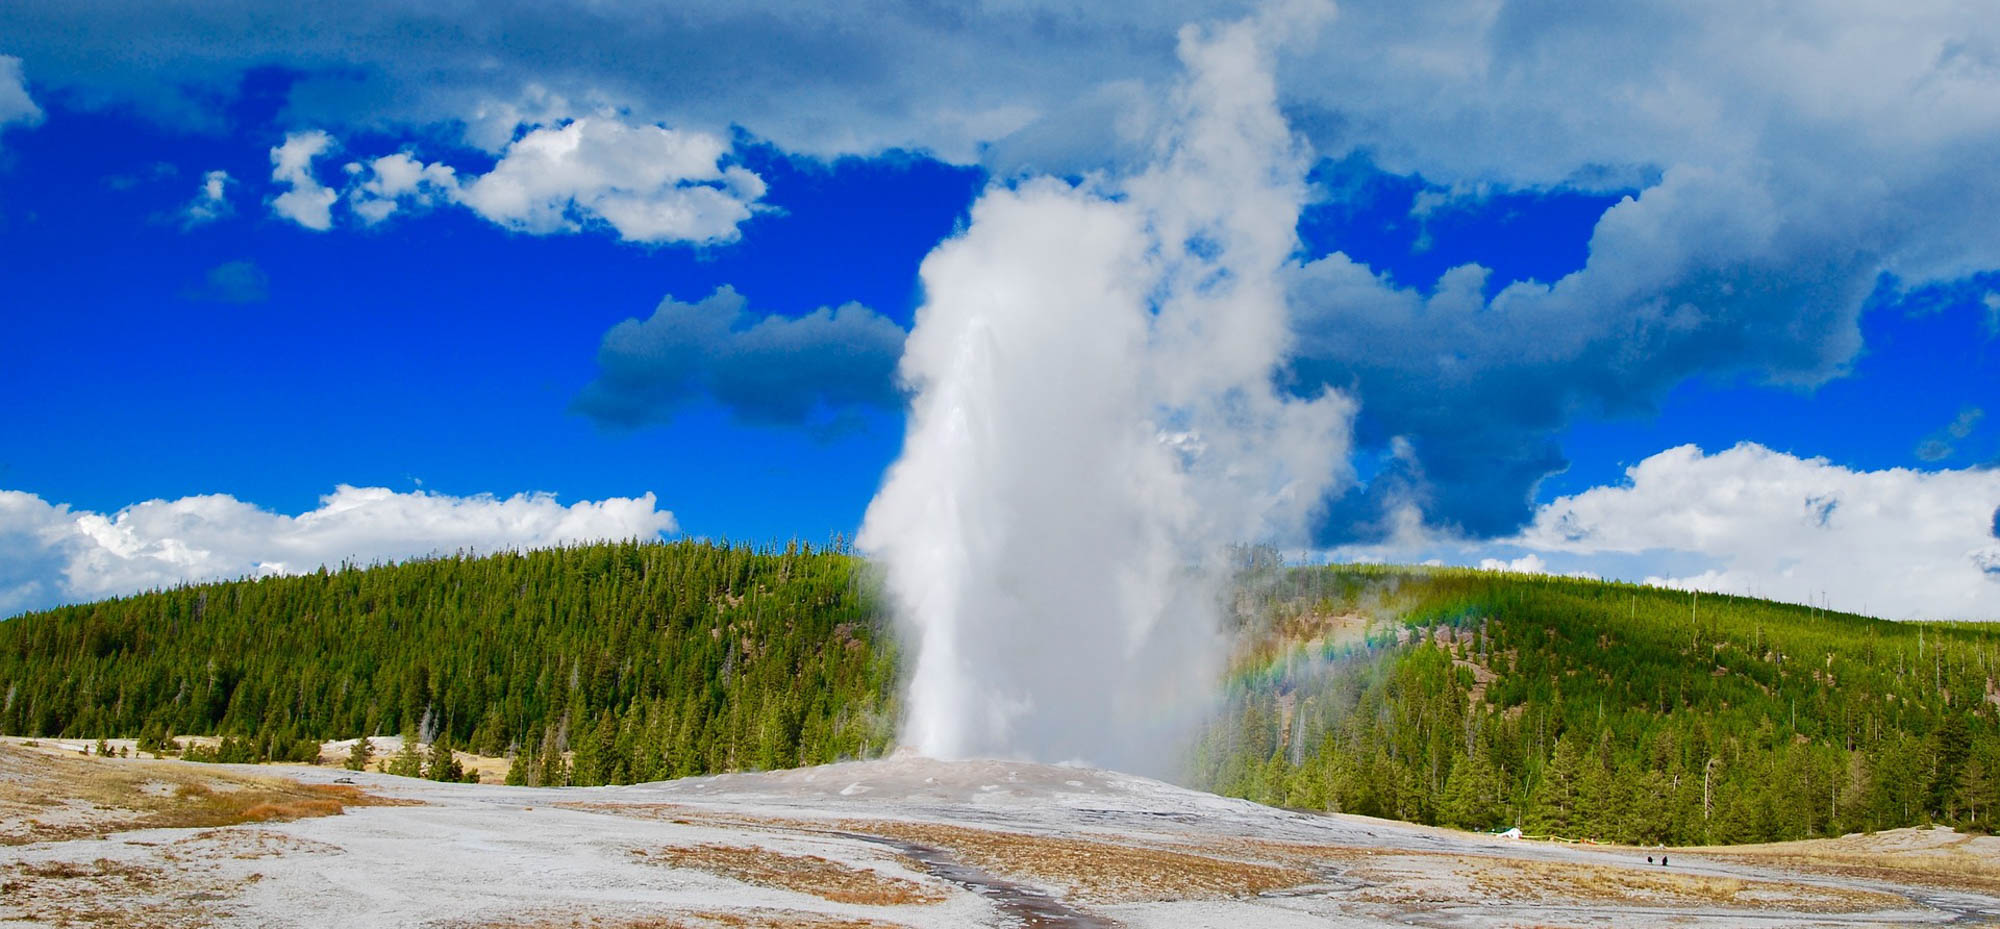 Geyser spewing at Yellowstone National Park